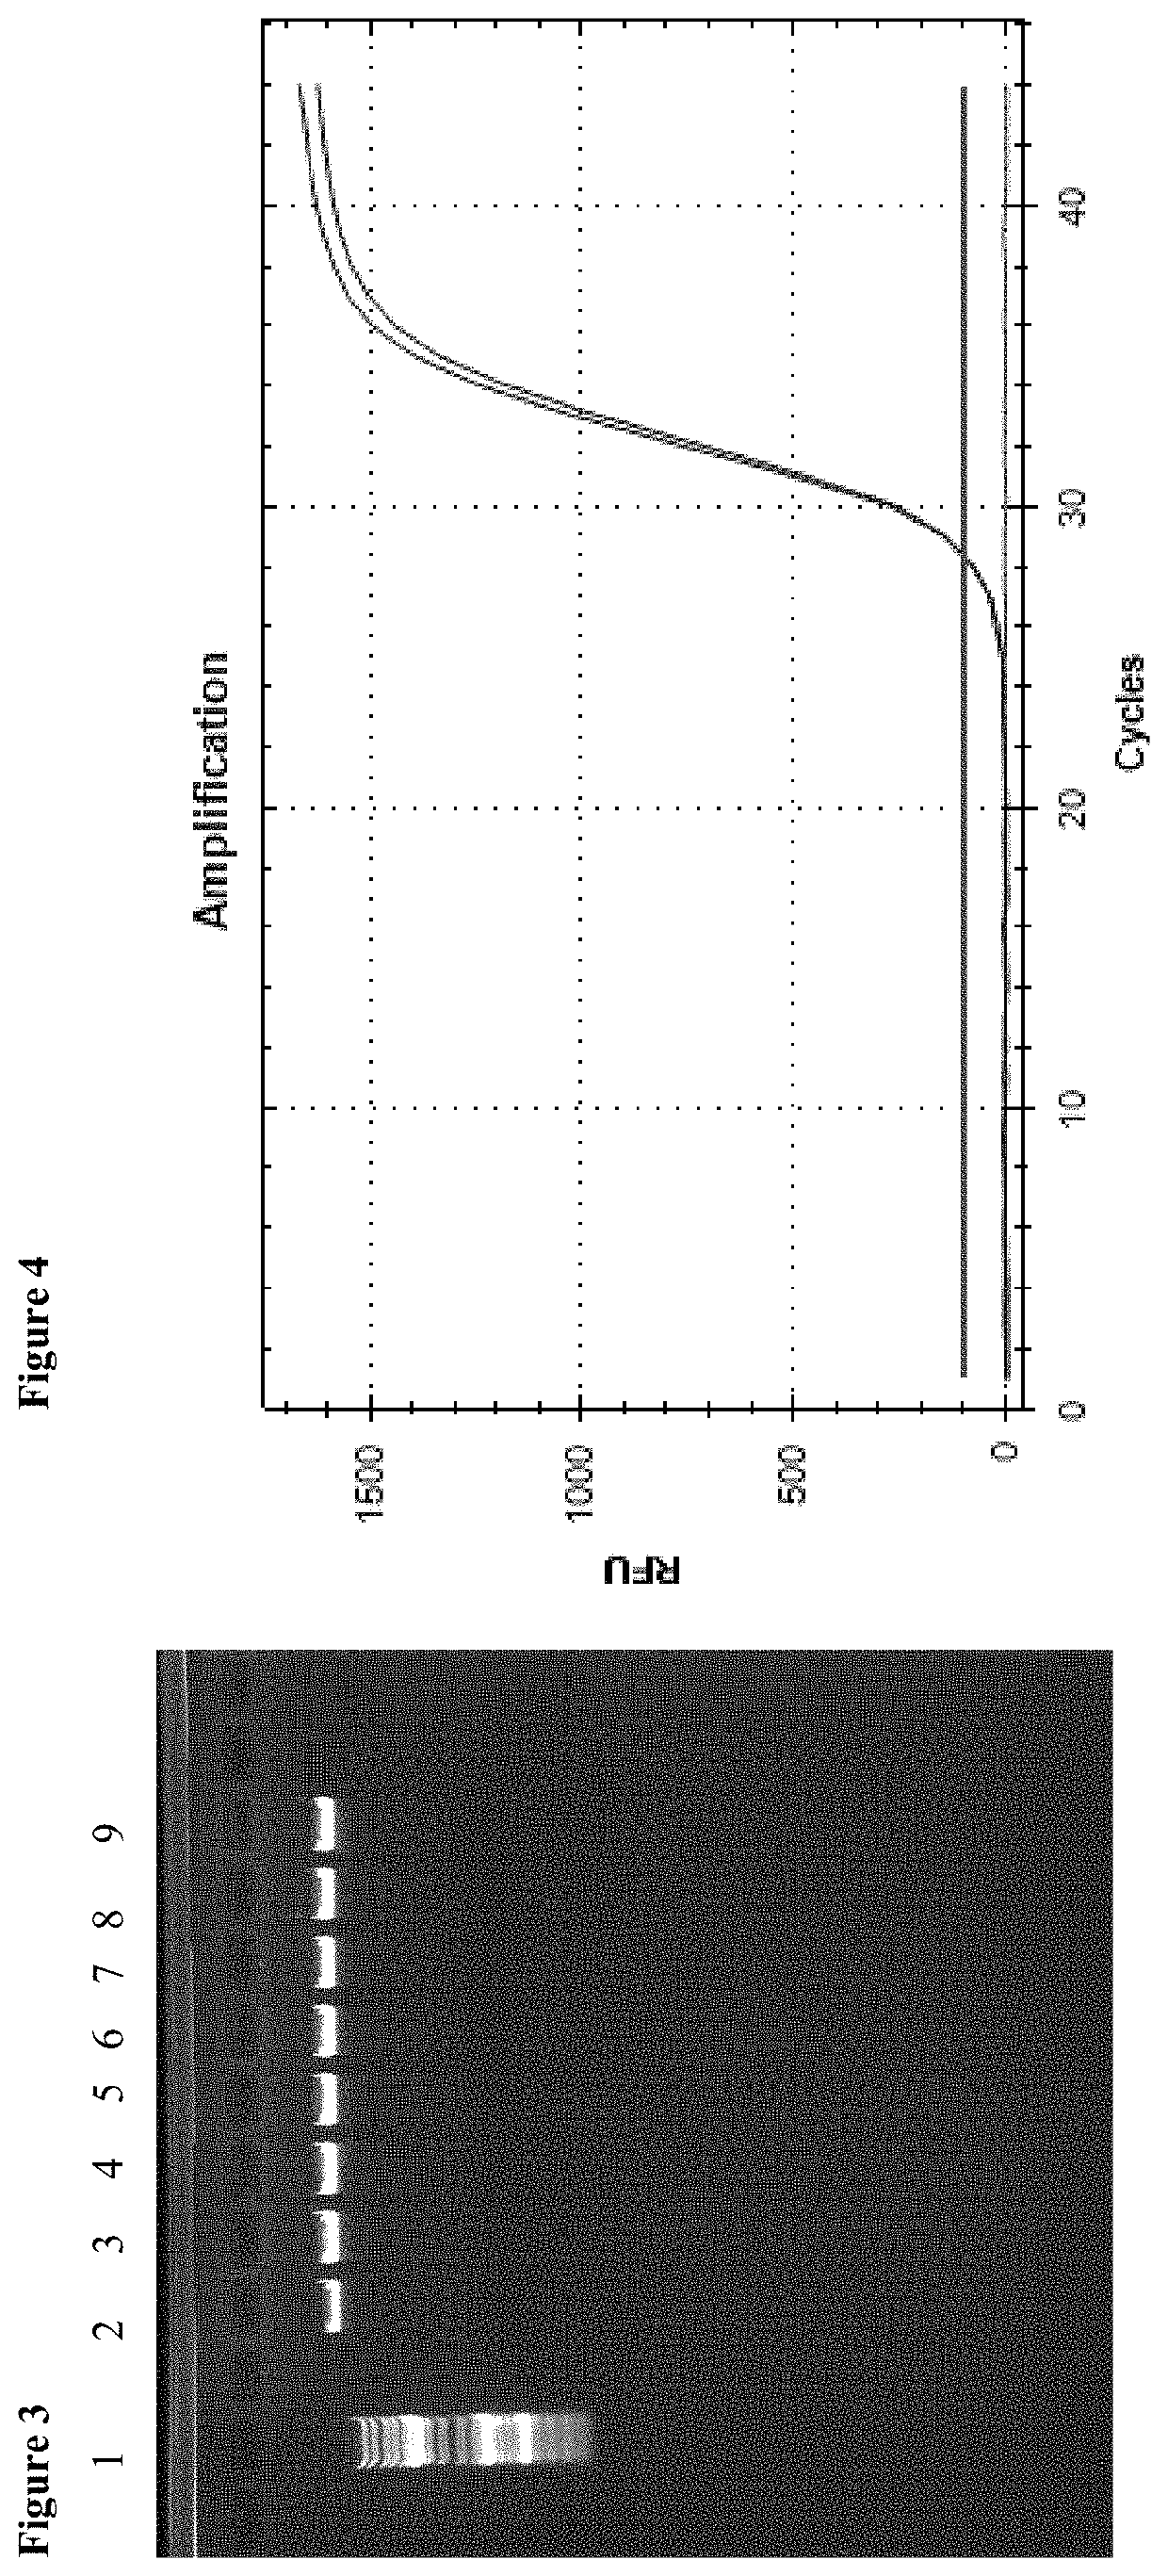 Method for enriching biomolecules and for removing the biomolecules from a biological sample